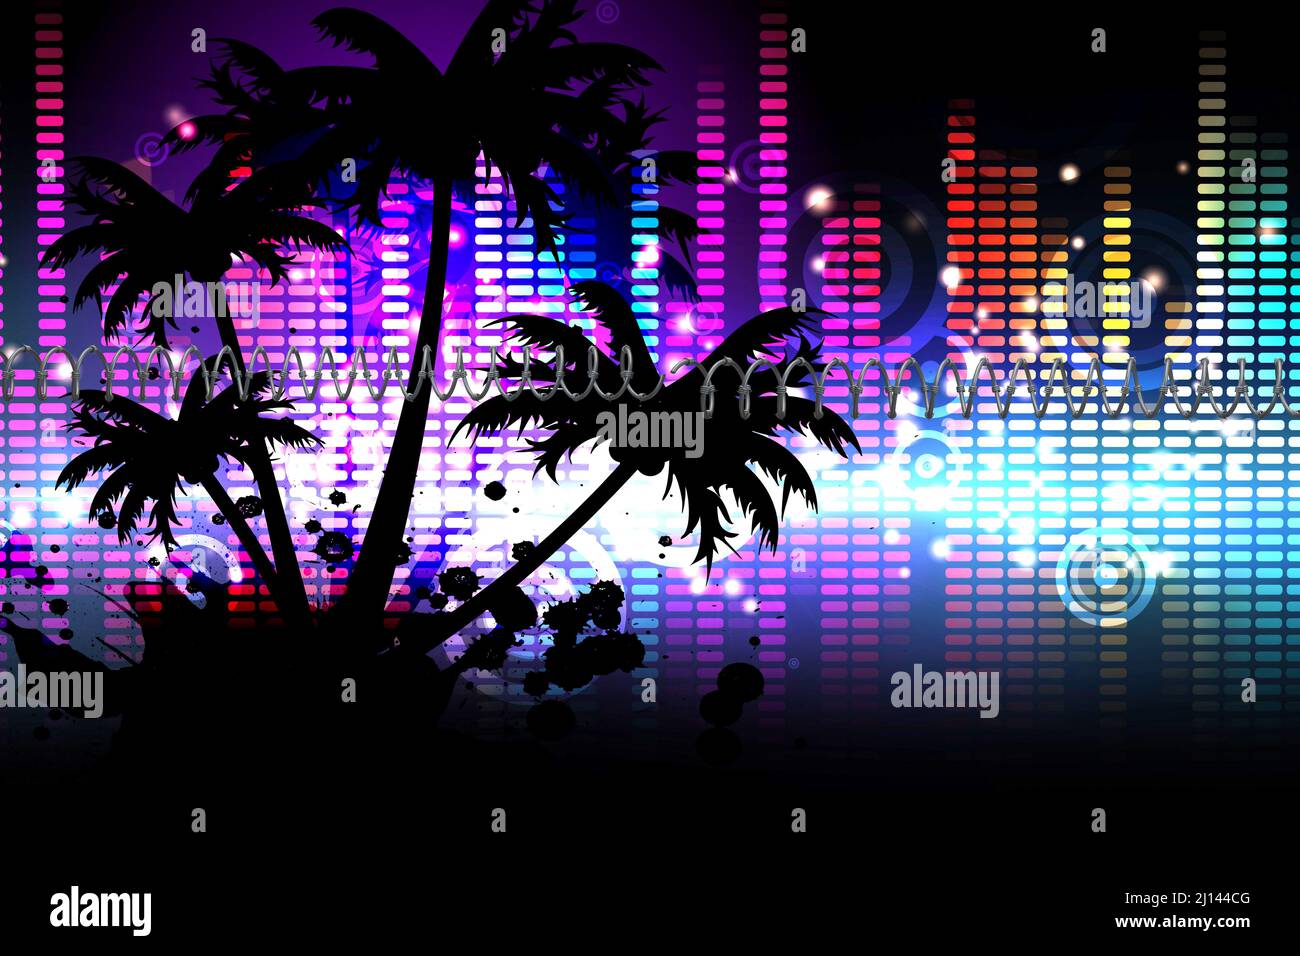 Barbed wire over silhouette of palm trees and music equalizer against black background Stock Photo